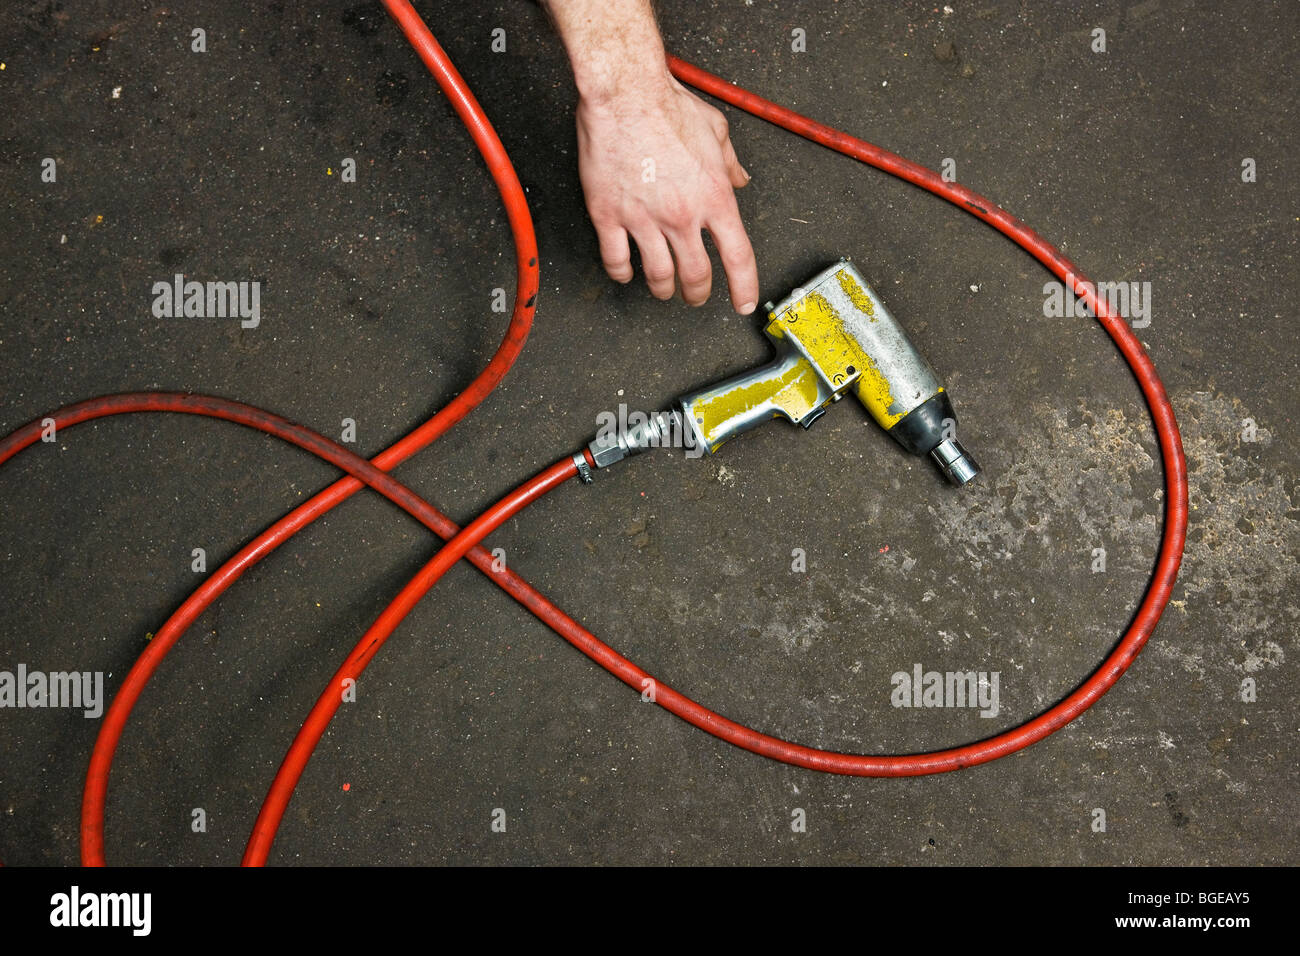 Man grabing compressed air tool from the floor. Stock Photo